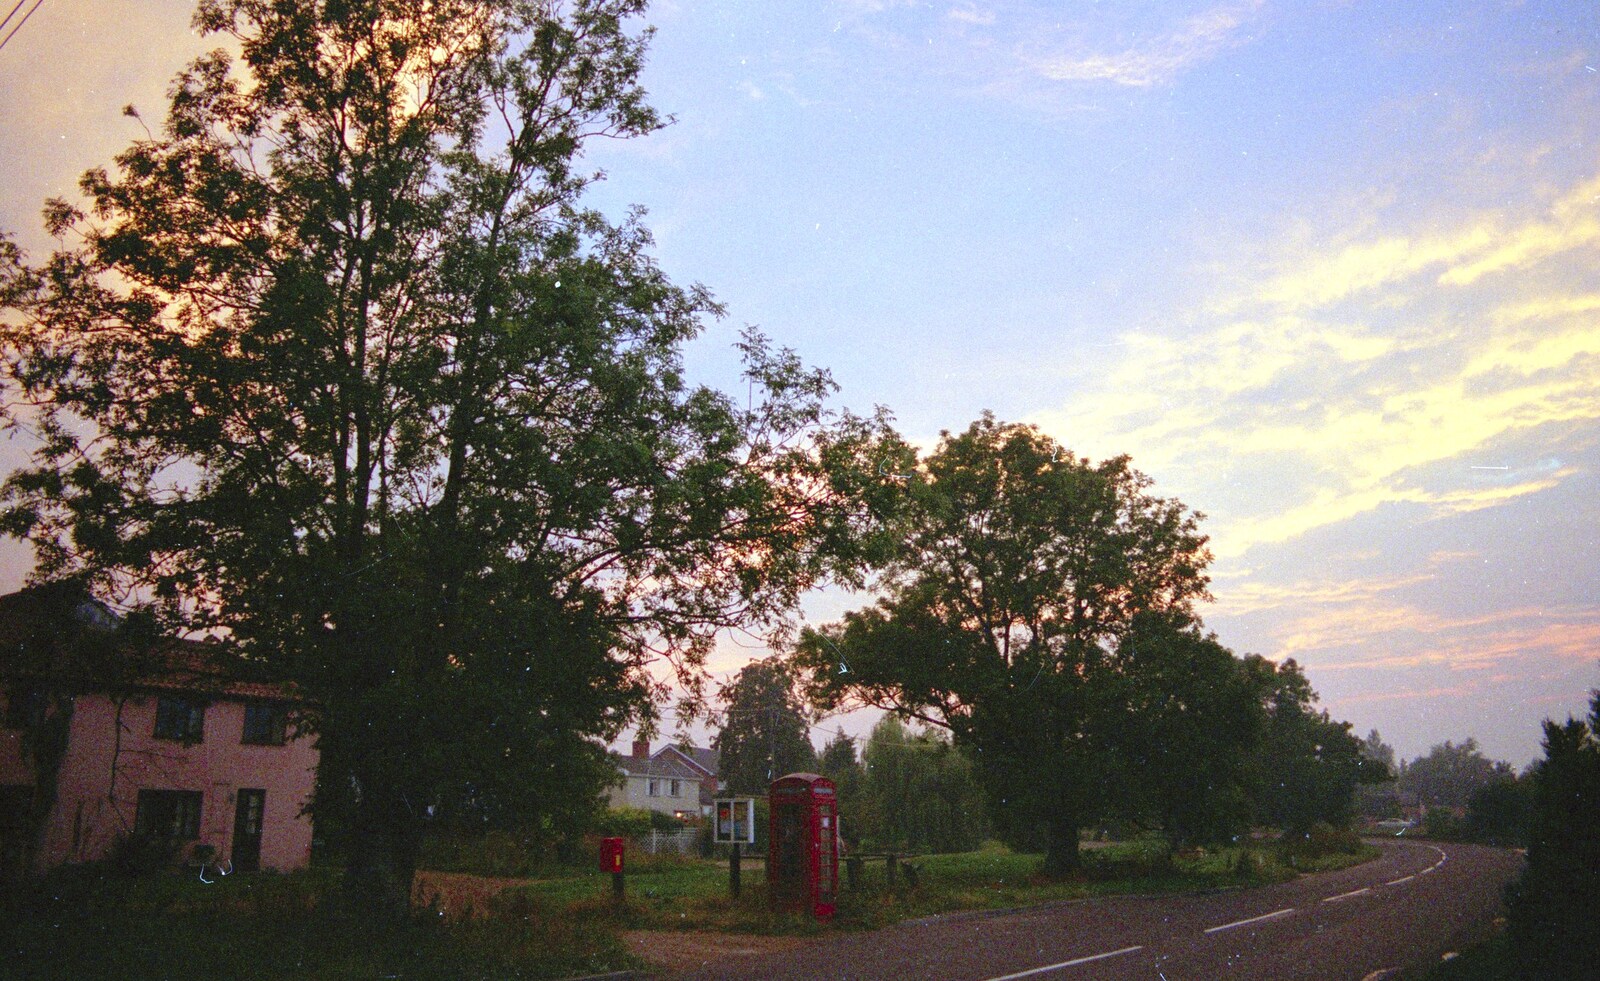 A sunset over the K6 phonebox at Stuston from A Trip to Sean's, and a Battle of Britain Flypast, Farnborough, Suffolk and London - 15th September 1990